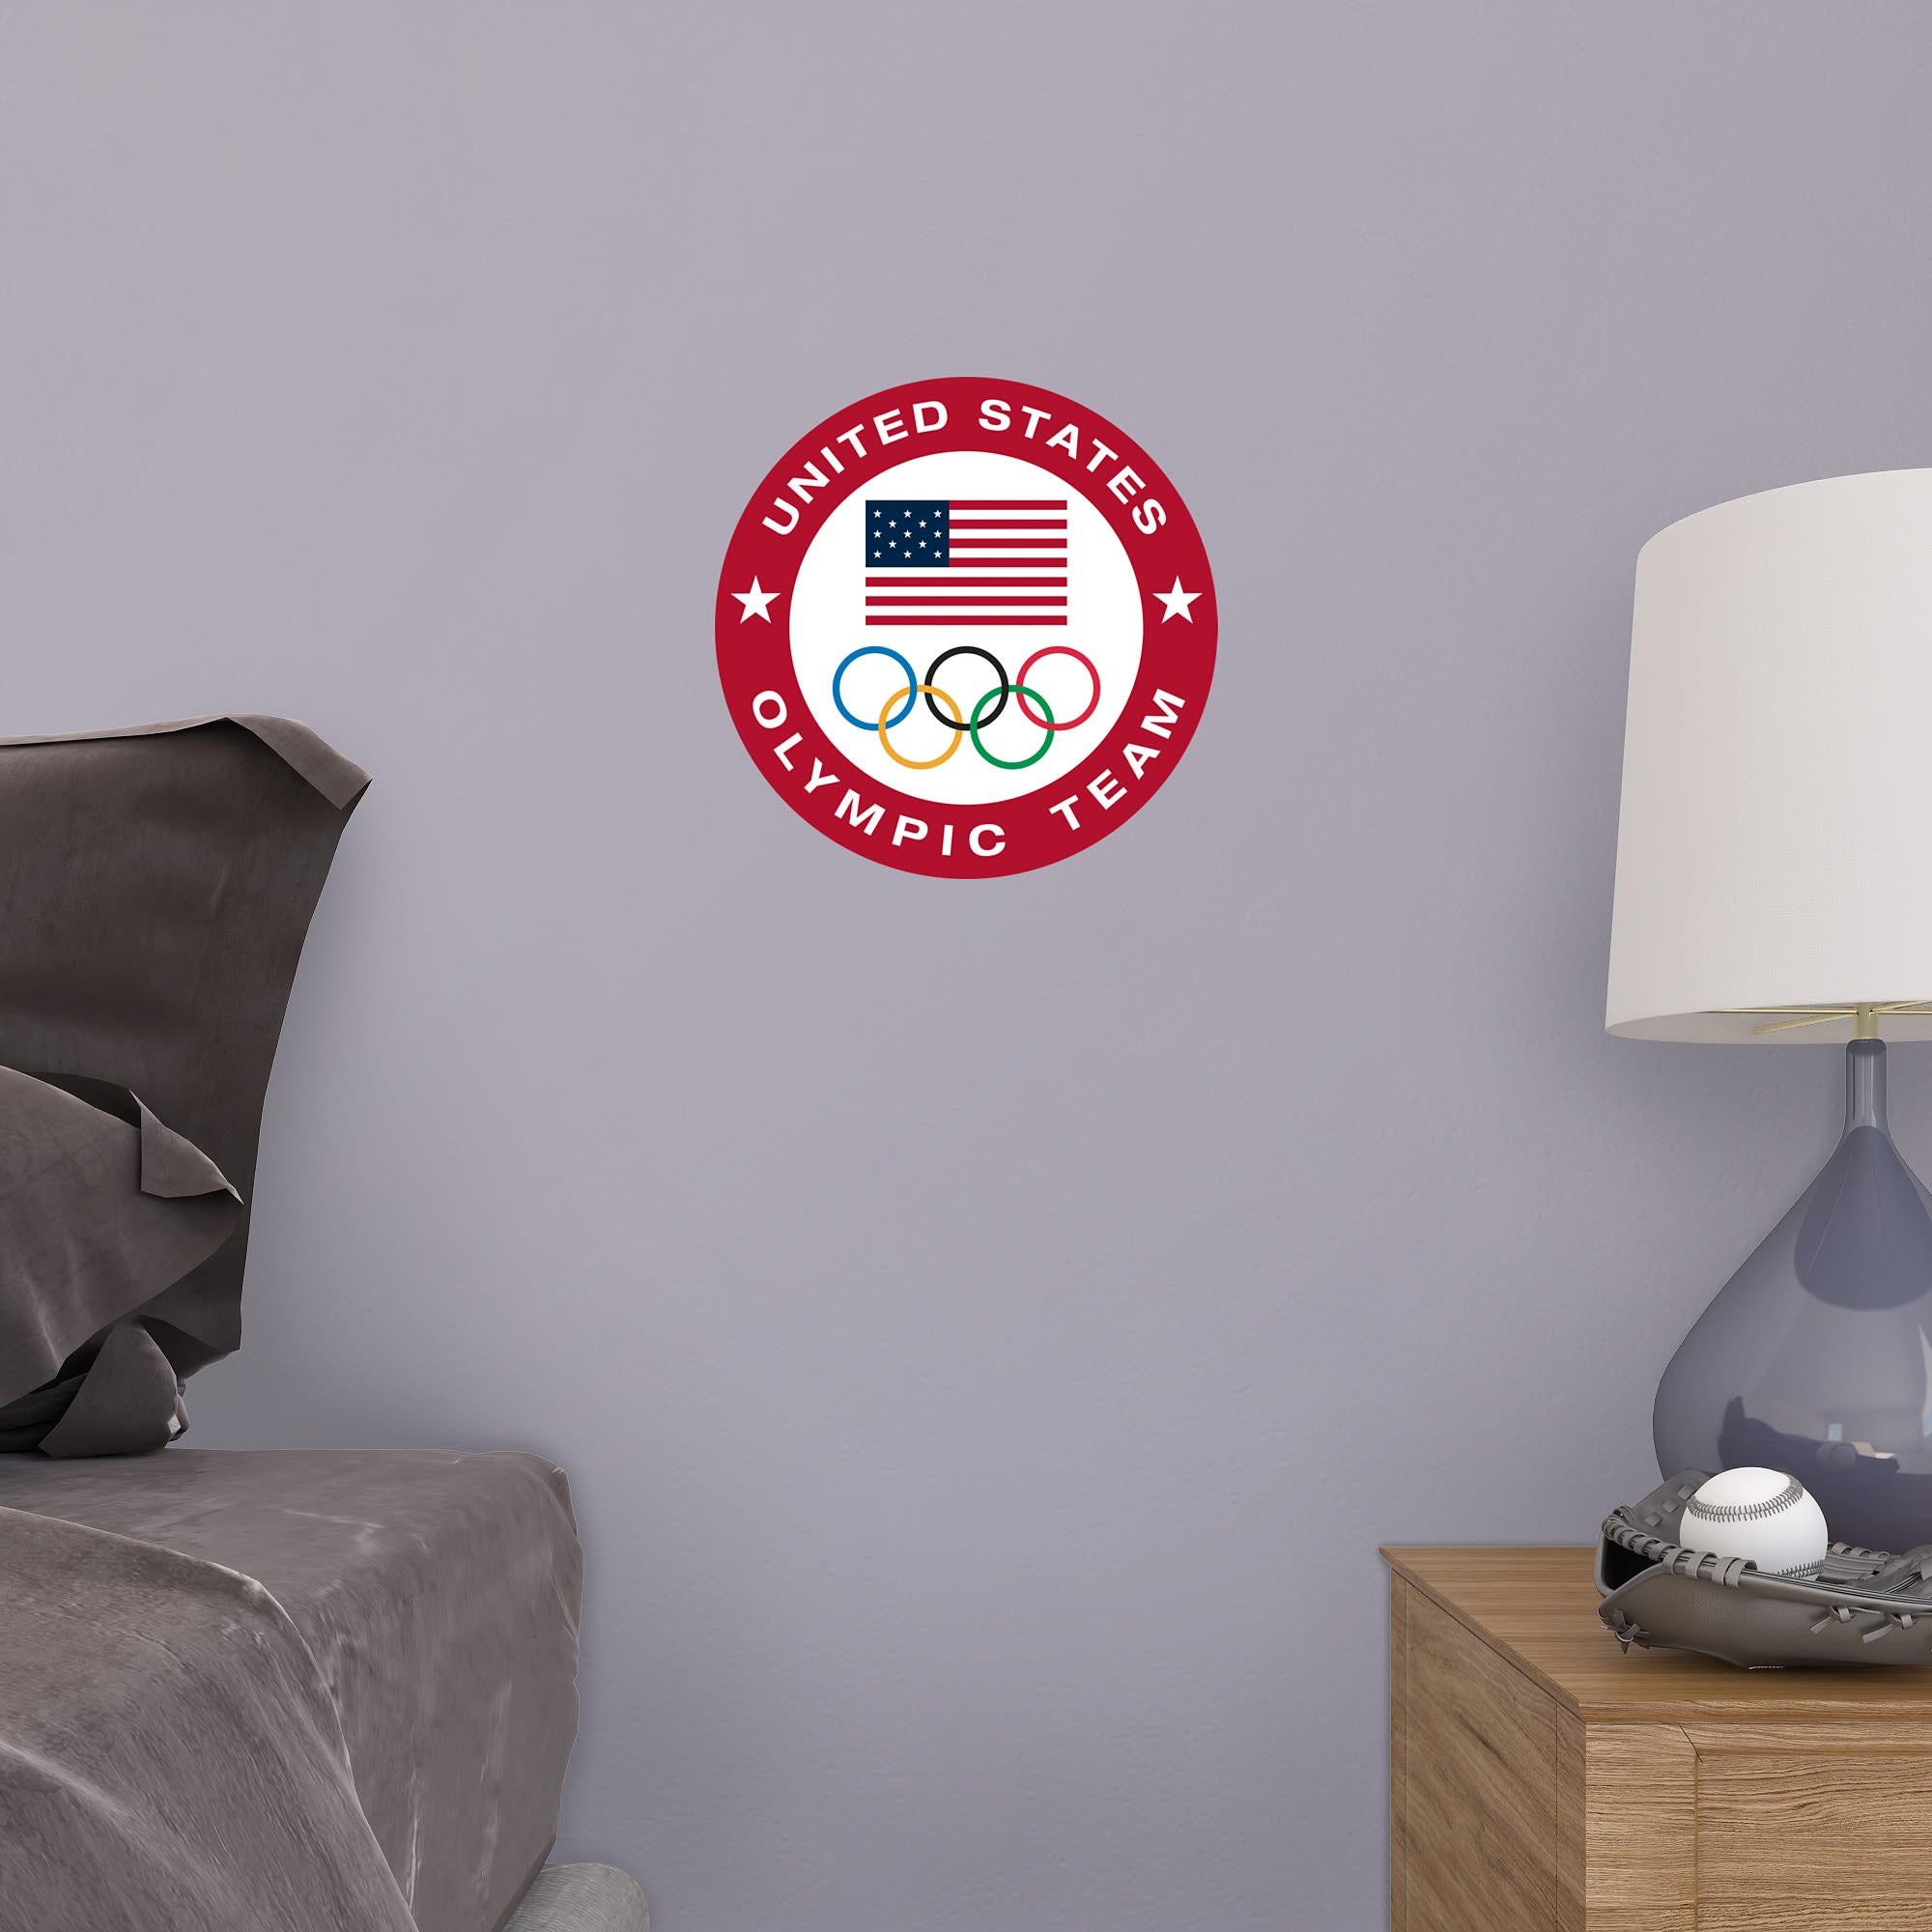 Team USA: Logo - Officially Licensed Removable Wall Decal 11.0"W x 11.0"H by Fathead | Vinyl